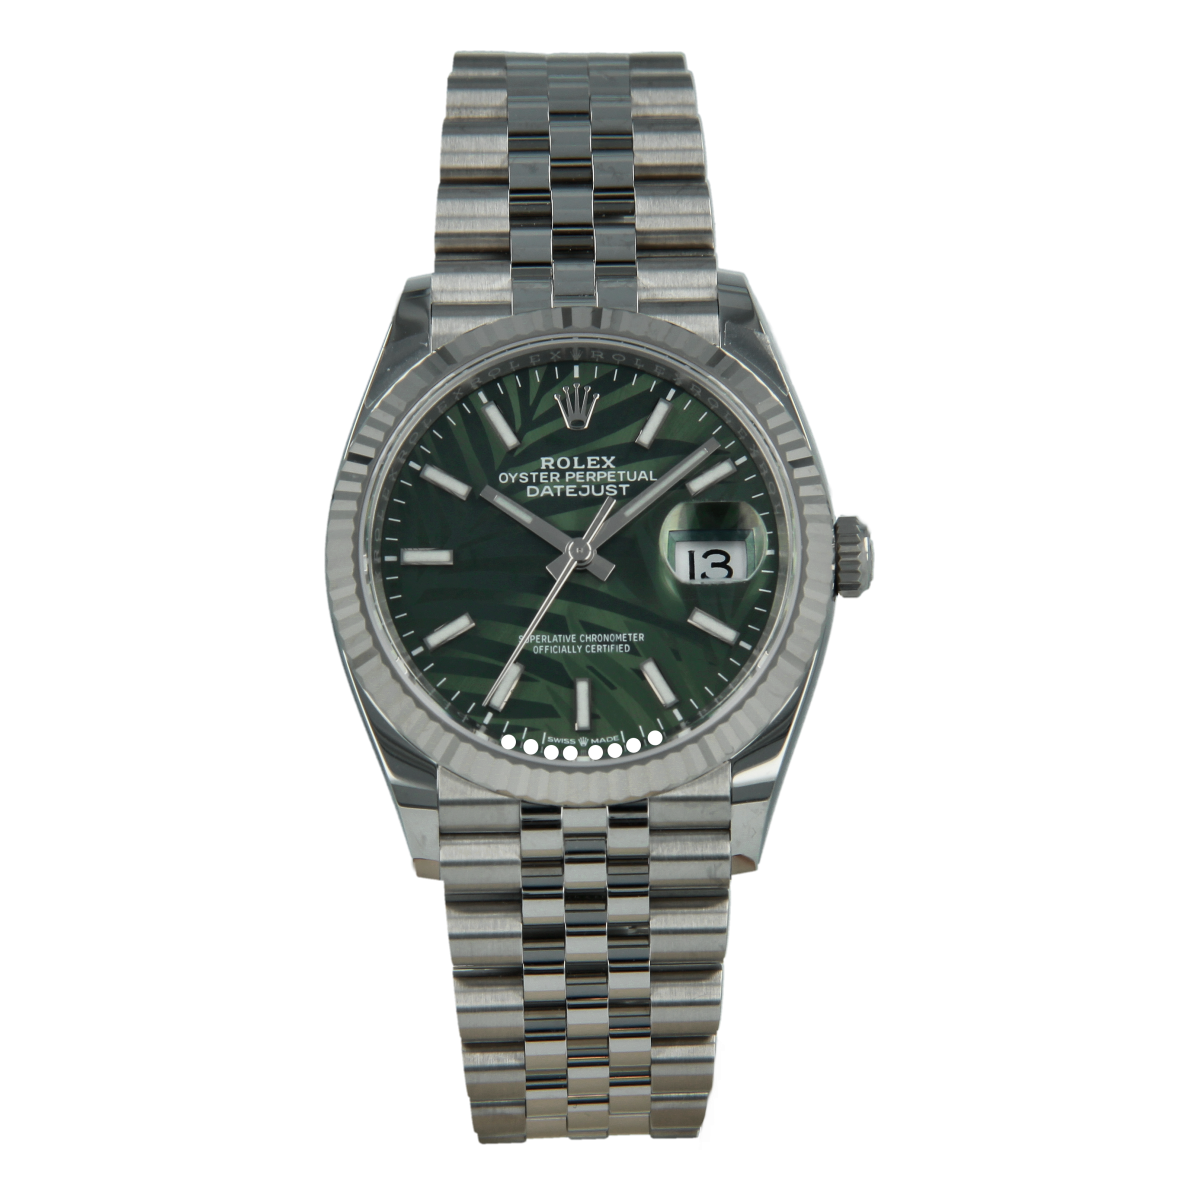 Rolex Datejust 126234 36mm Olive-Green Palm-Motif Dial *Brand-New* | Buy pre-owned Rolex watch